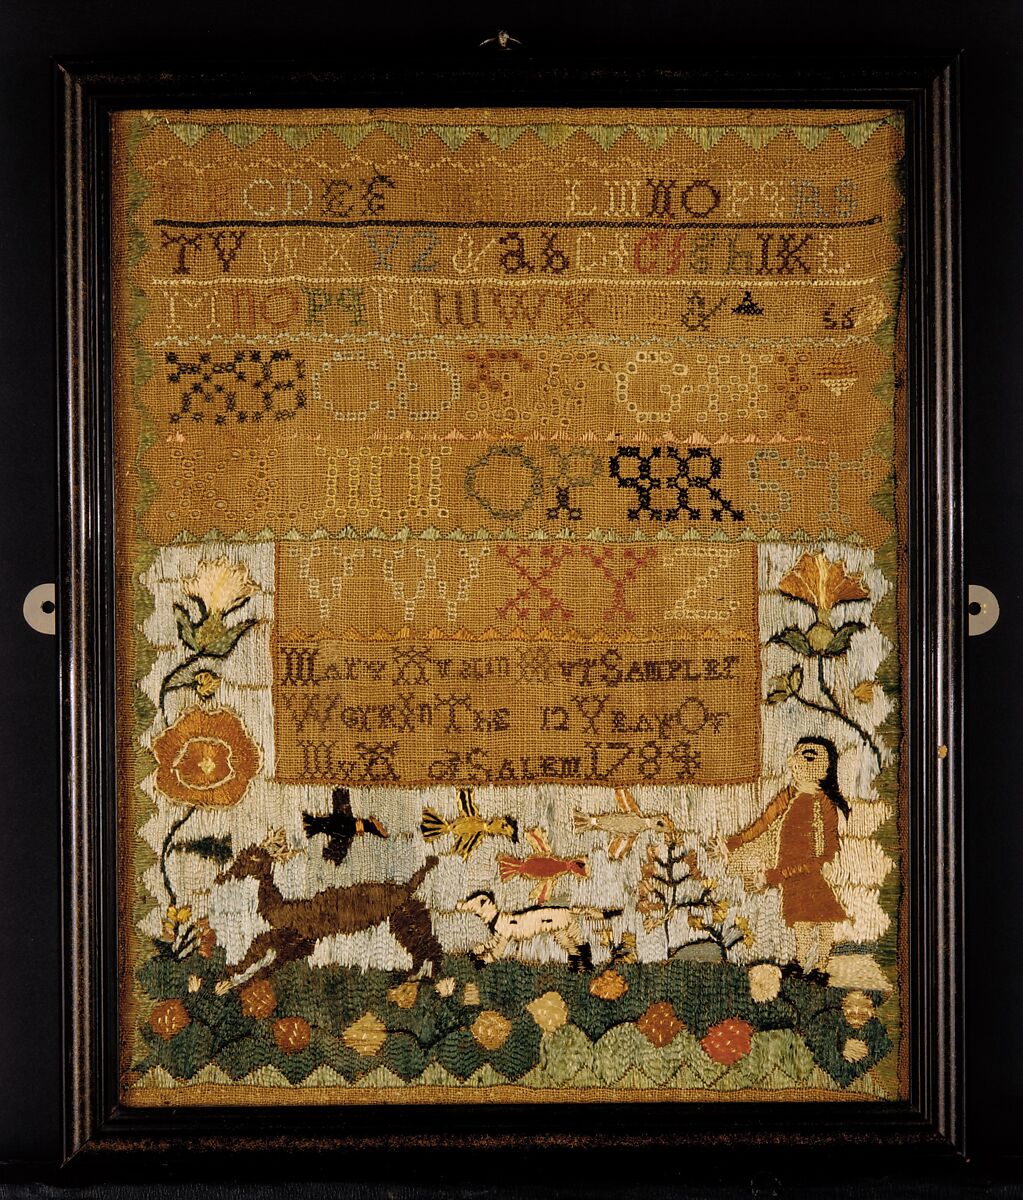 Embroidered sampler, Mary Austin (born 1773), Silk embroidery on linen, American 